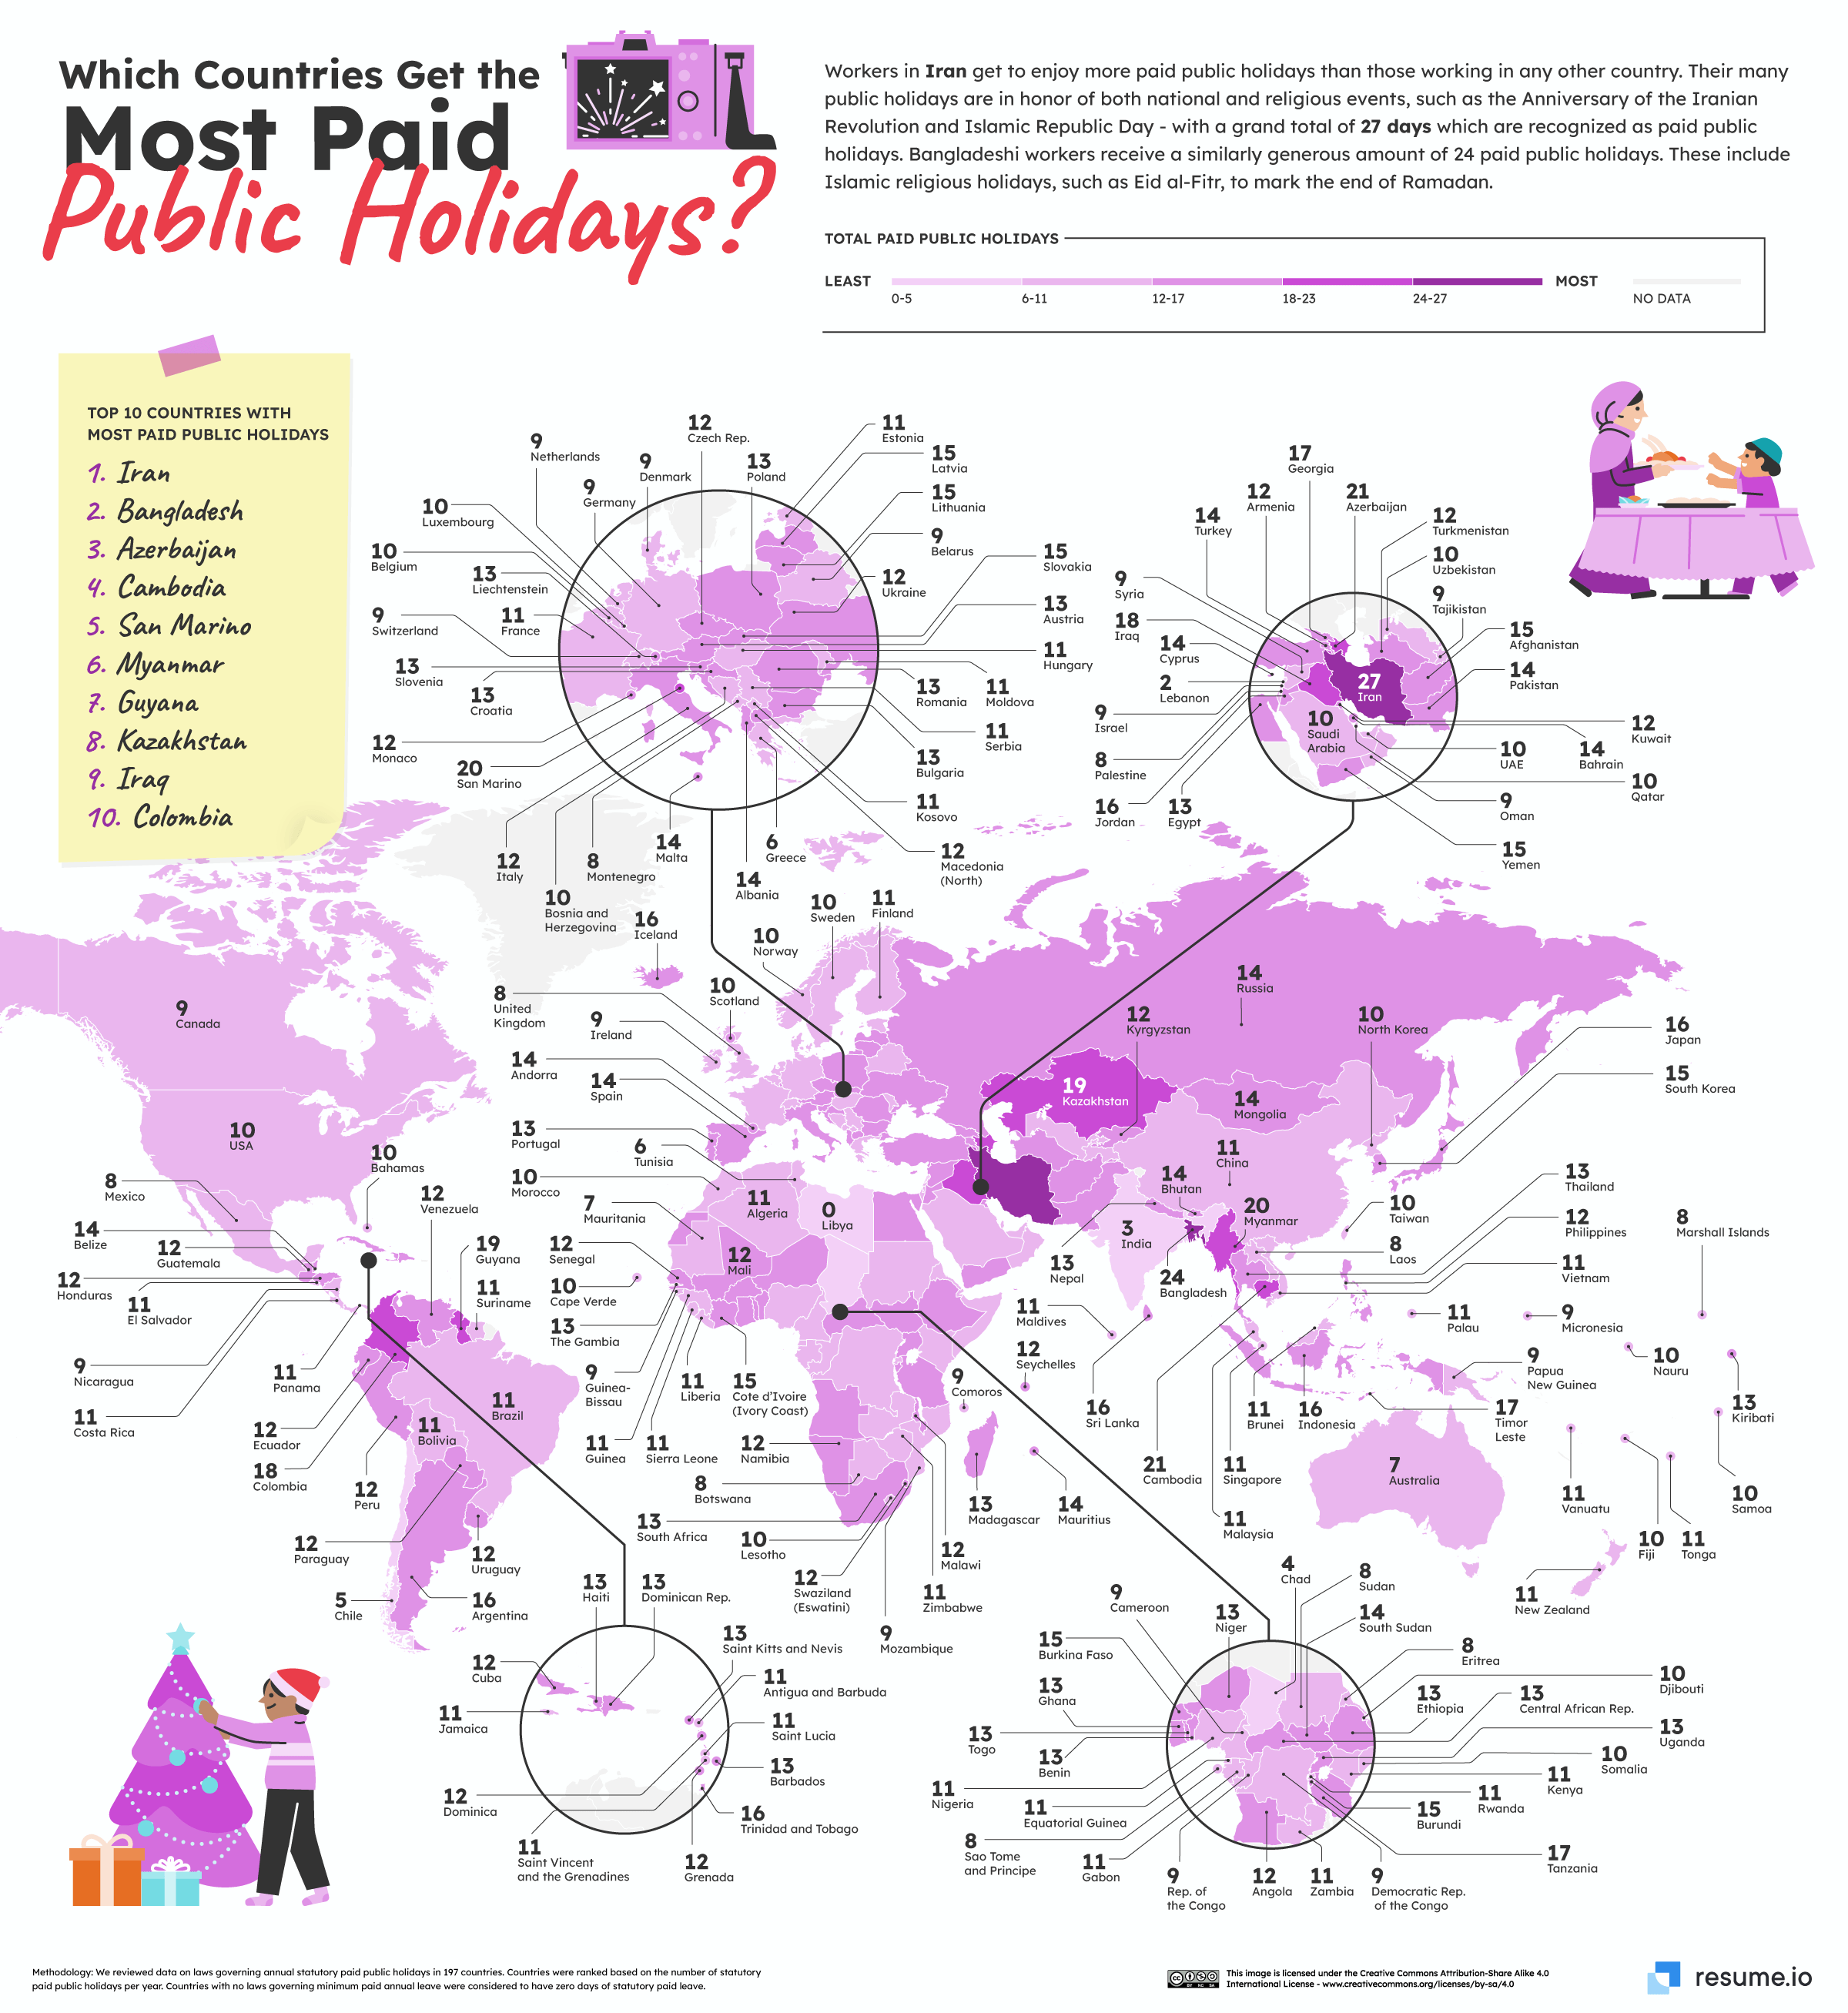 Countries with most paid public holidays